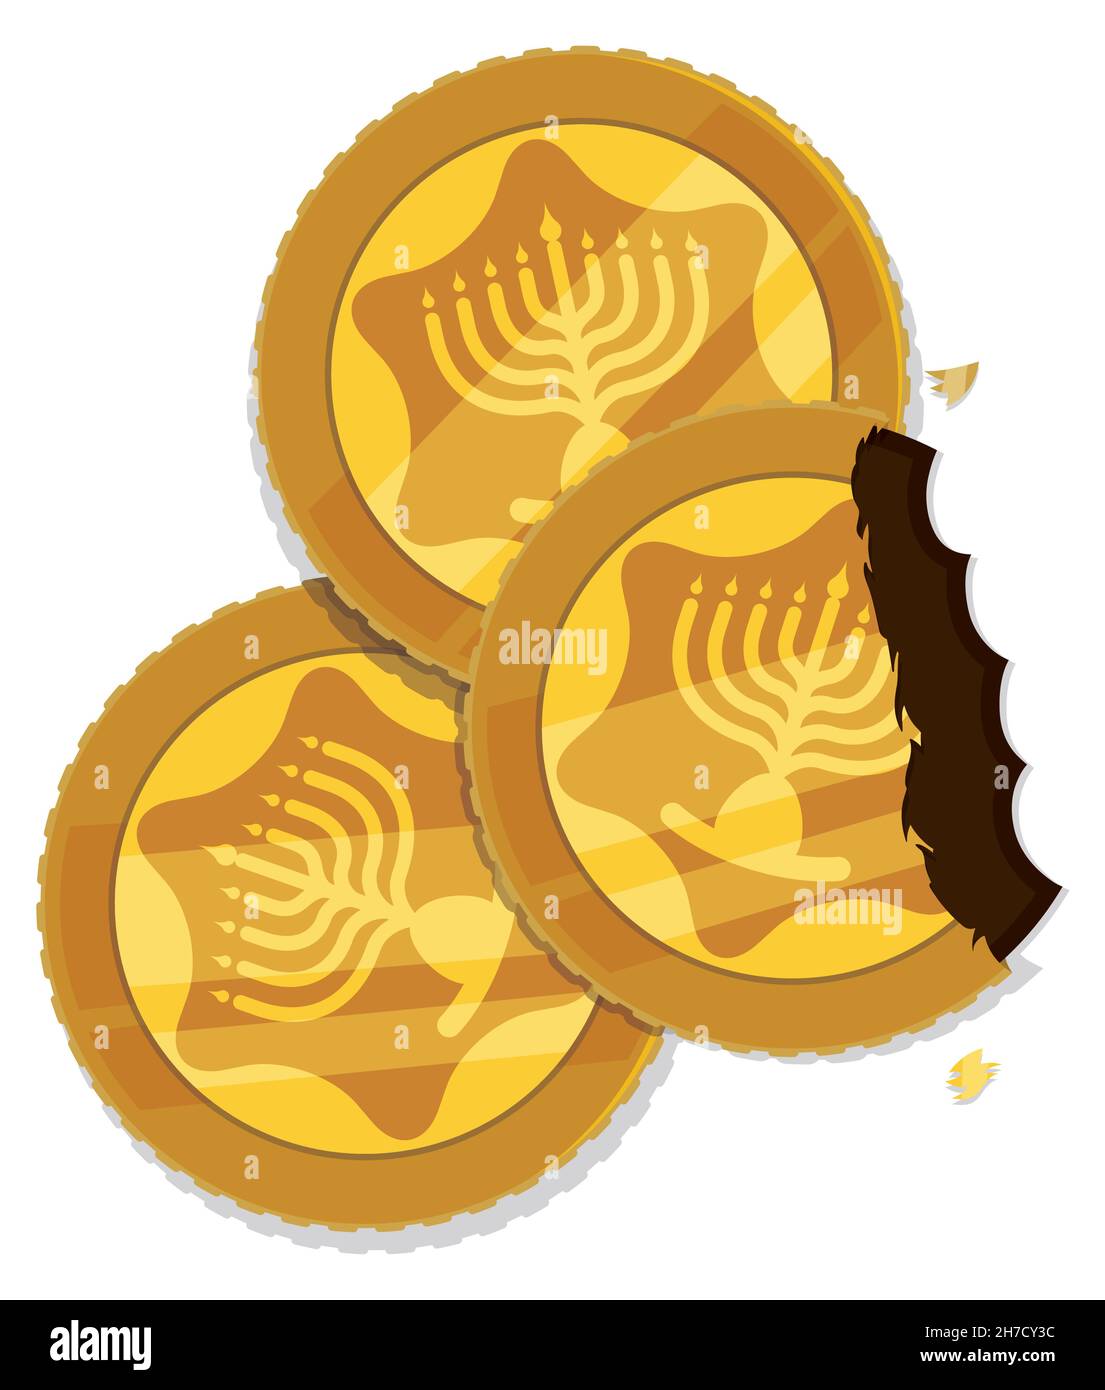 Three Hanukkah gelt -chocolate coins- decorated with David's Star and hanukkiah silhouettes, with one opened and other with bite mark. Stock Vector